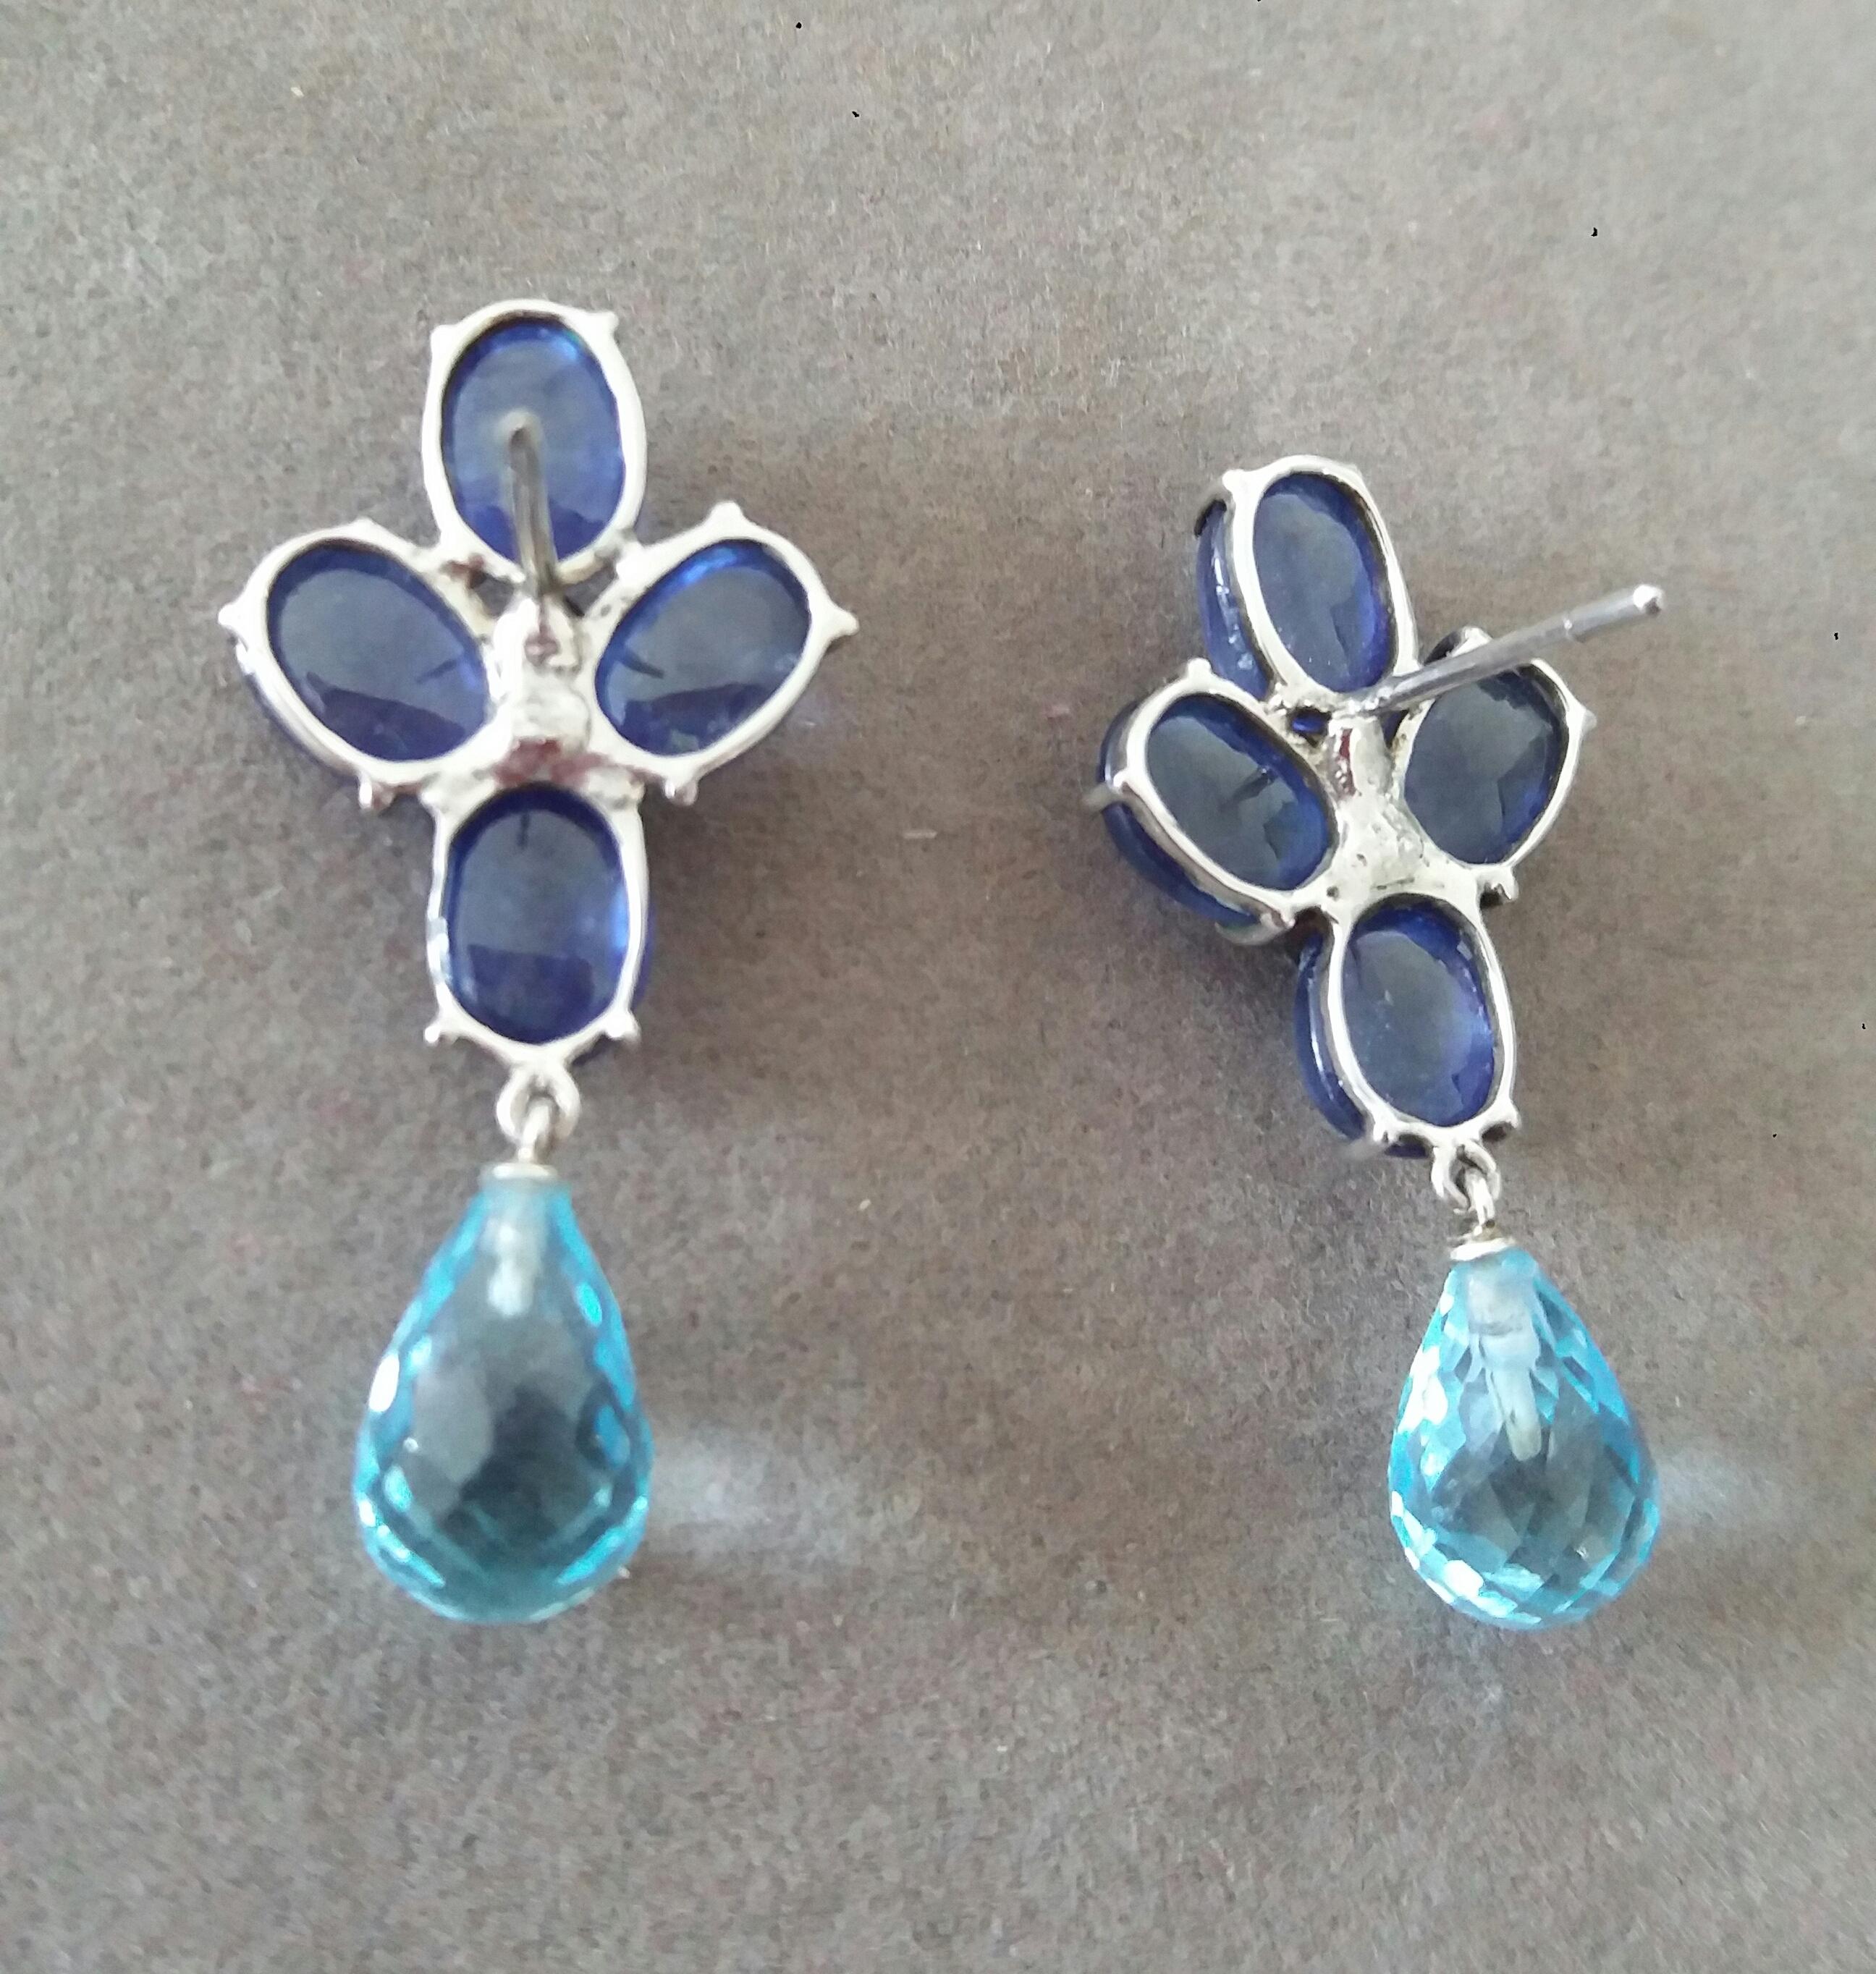 Mixed Cut 20 Carats Blue Sapphire Cabs Gold Diamonds Faceted Sky Blue Topaz Drops Earrings For Sale